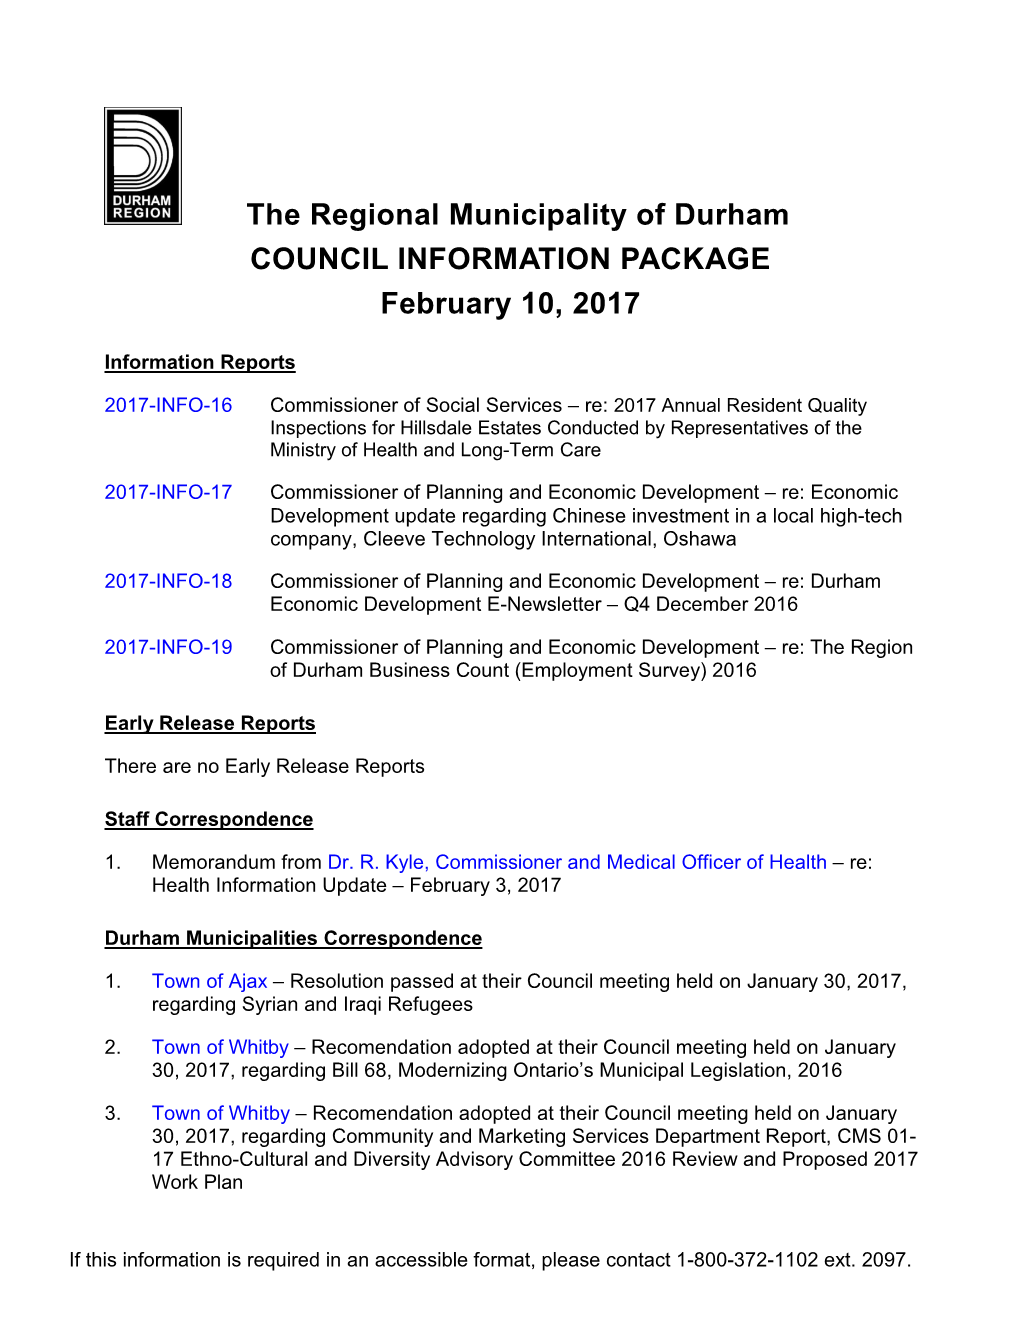 COUNCIL INFORMATION PACKAGE February 10, 2017